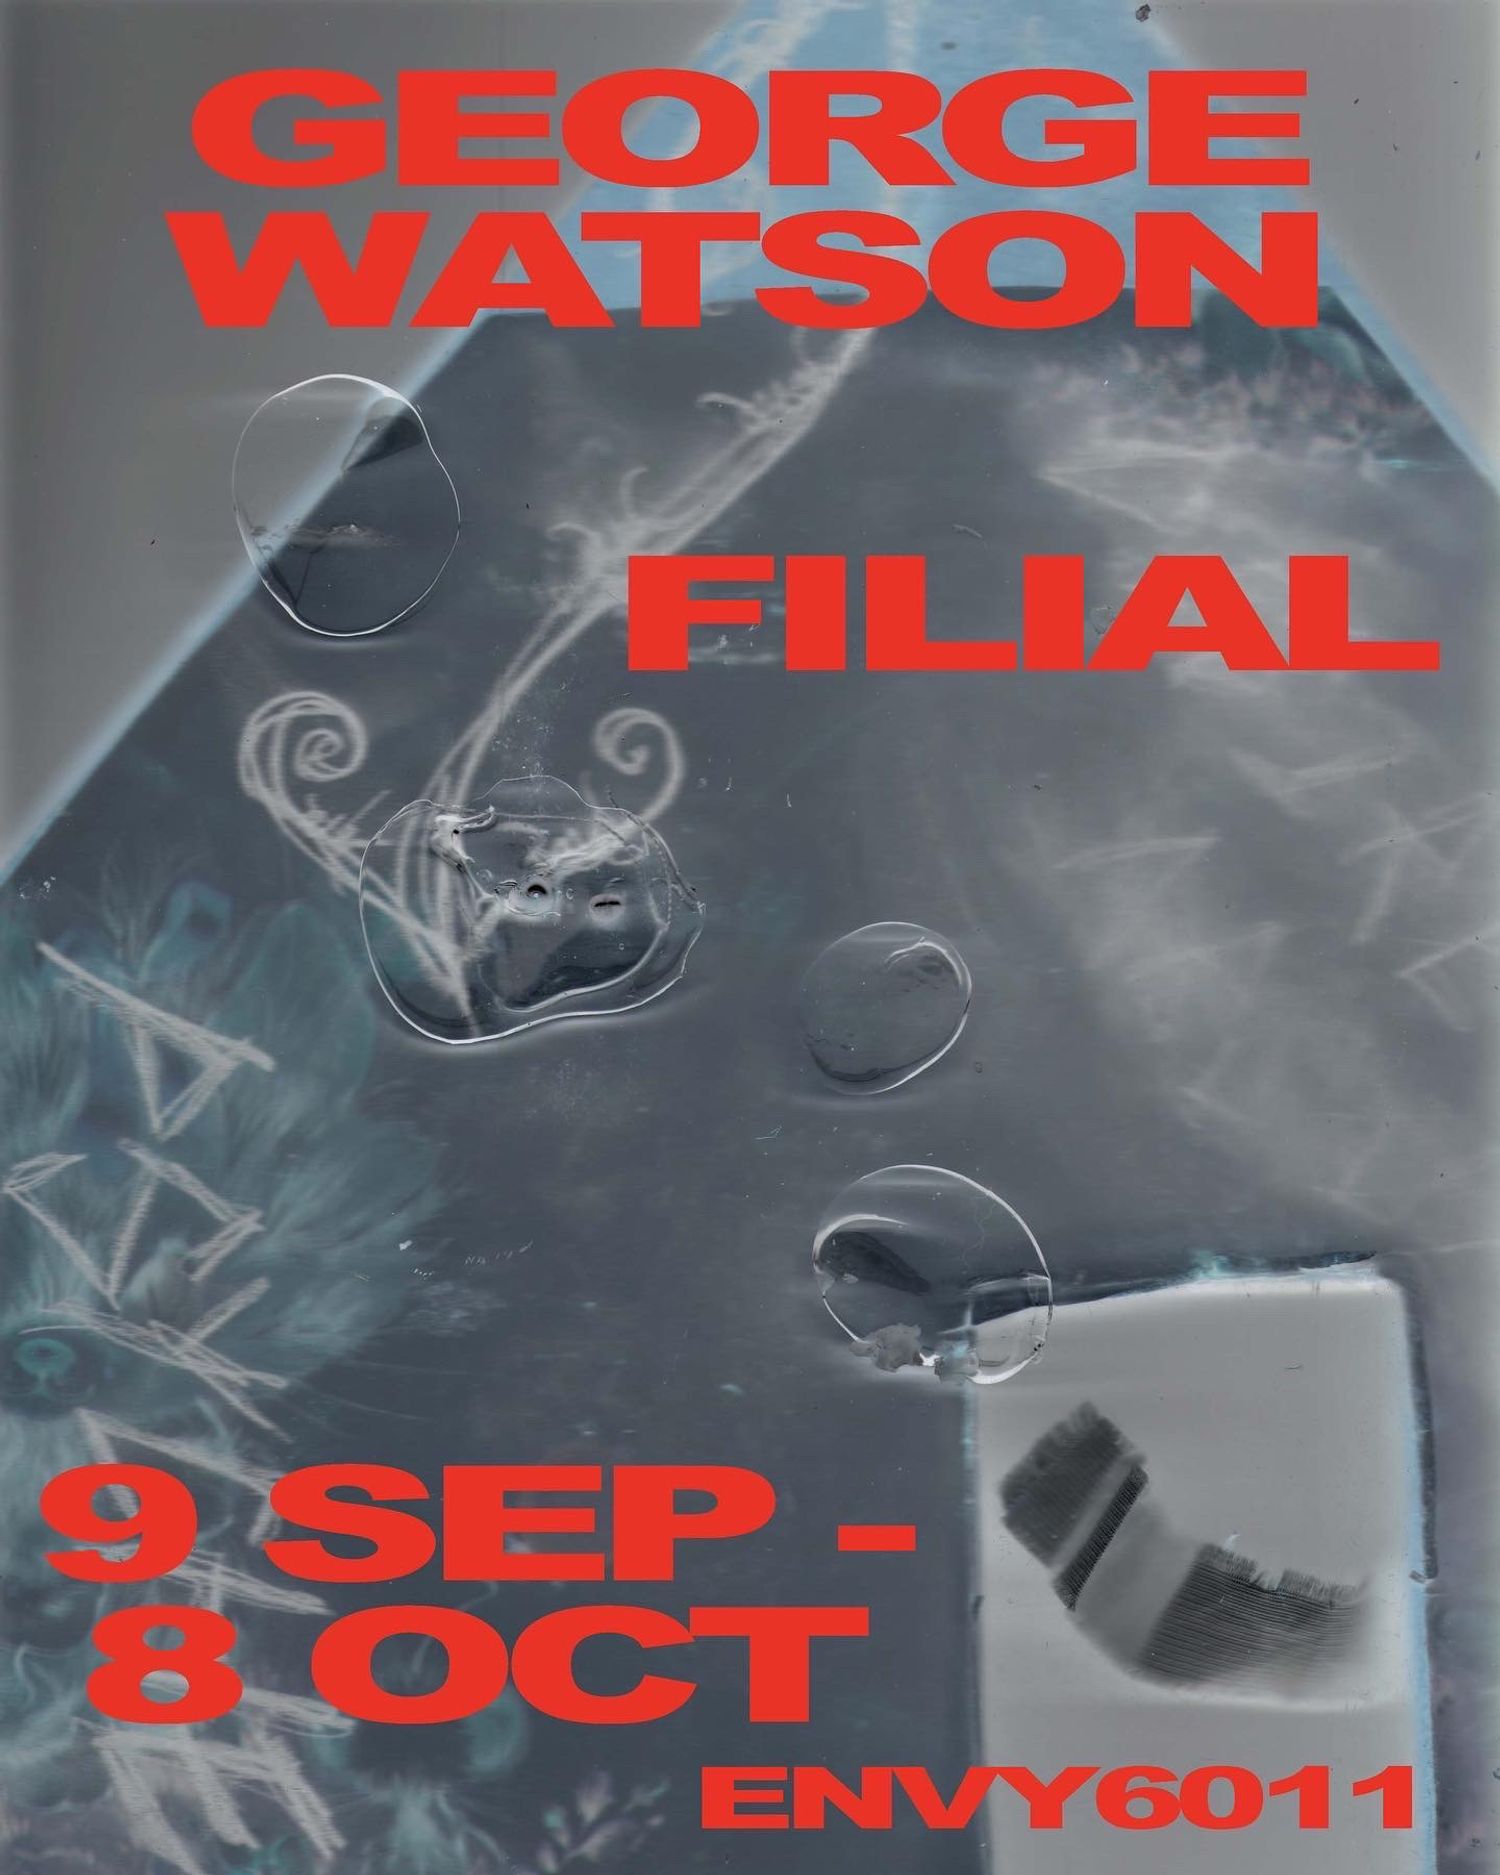 Envy6011 is pleased to present a new solo exhibition of work by George Watson